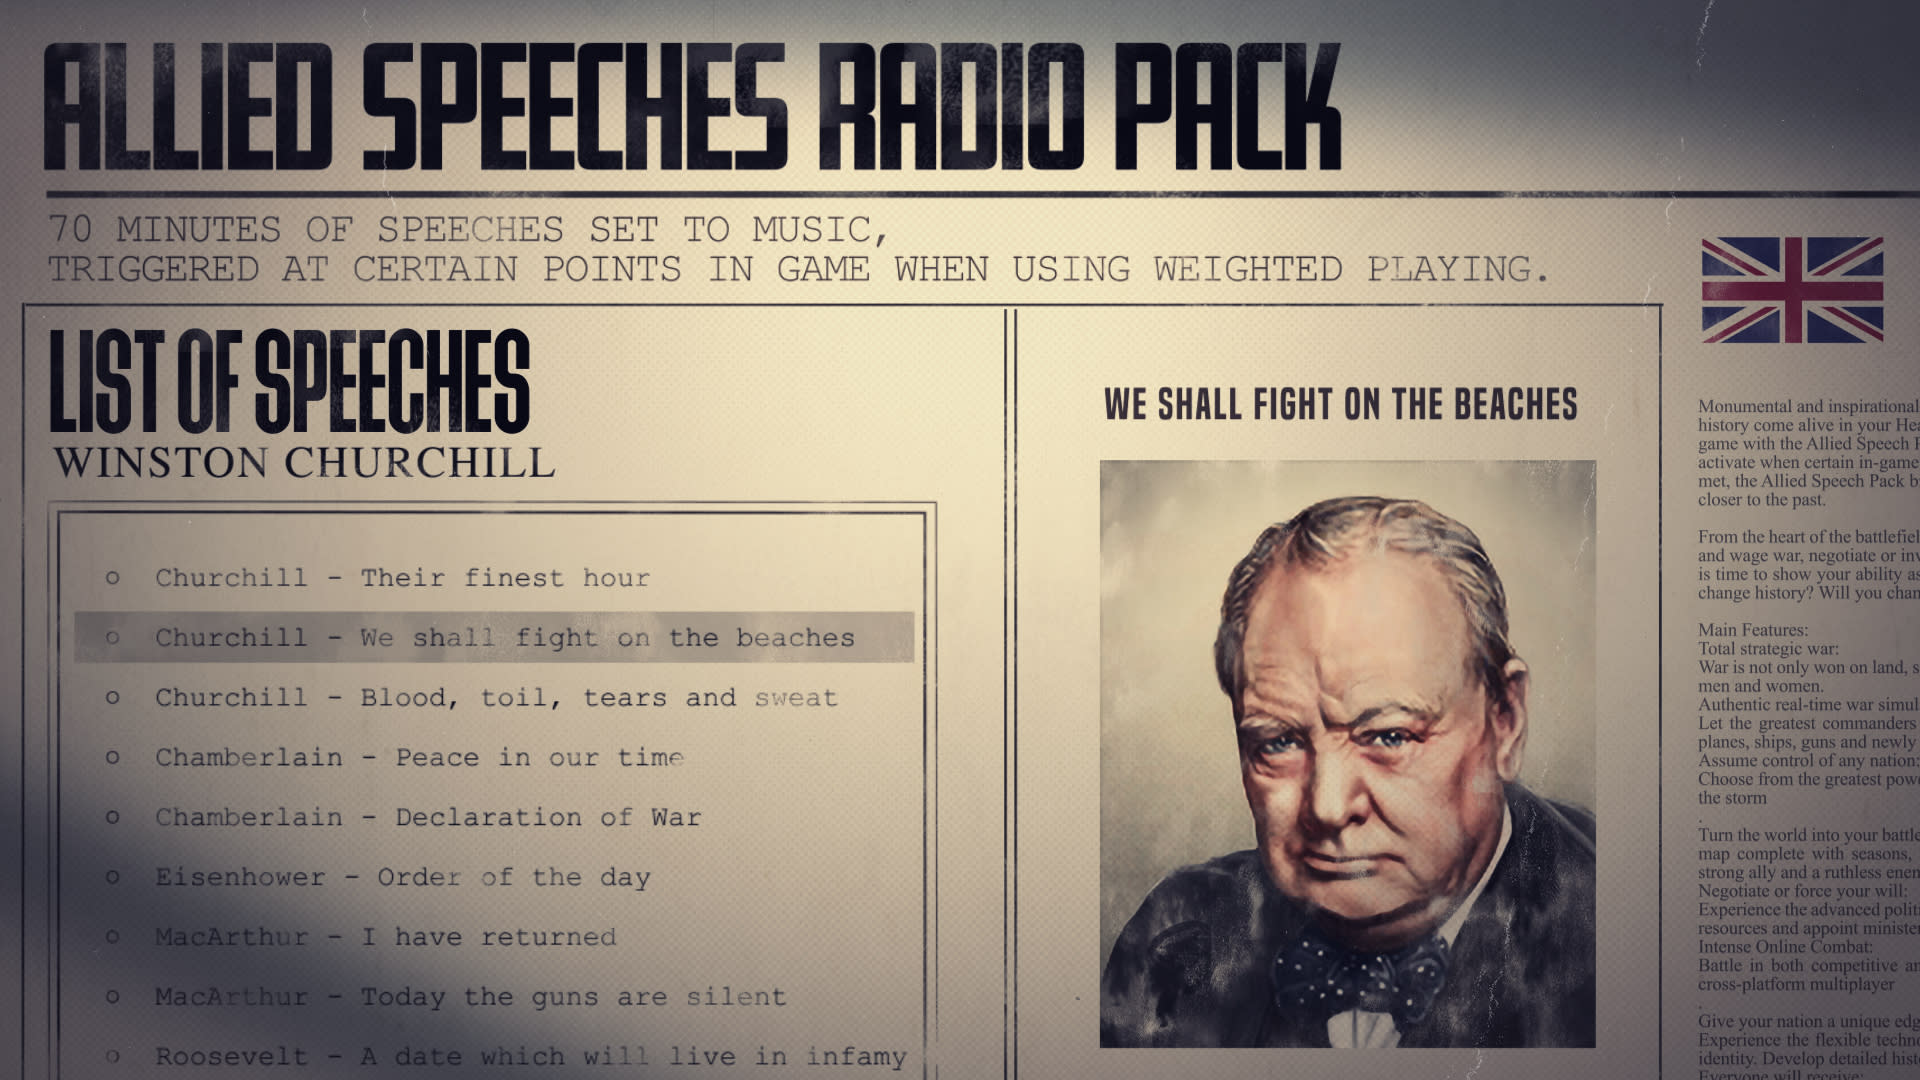 Hearts of Iron IV: Allied Speeches Pack (screenshot 2)